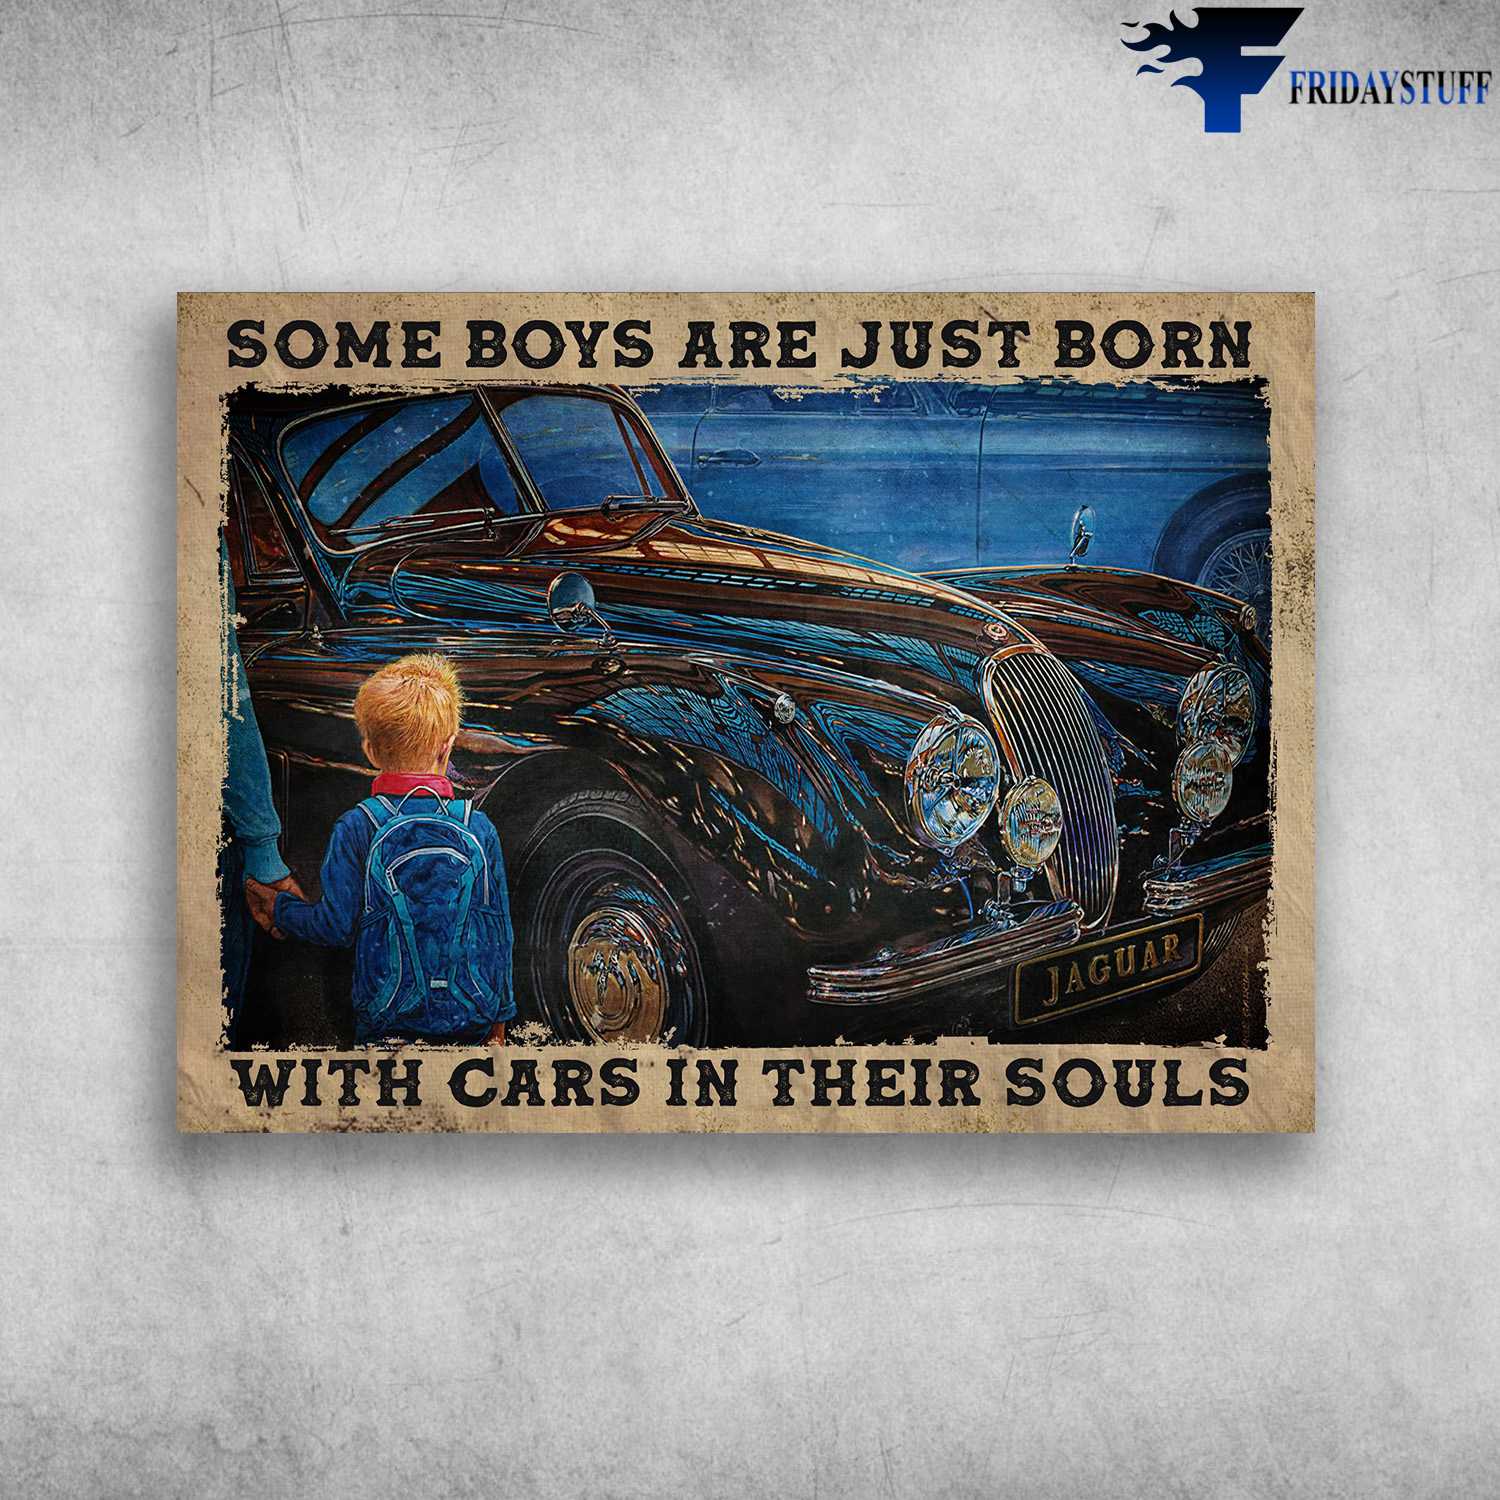 Boys Loves Car, Jaguar Car - Some Boys Are Just Born, With Cars In Their Souls